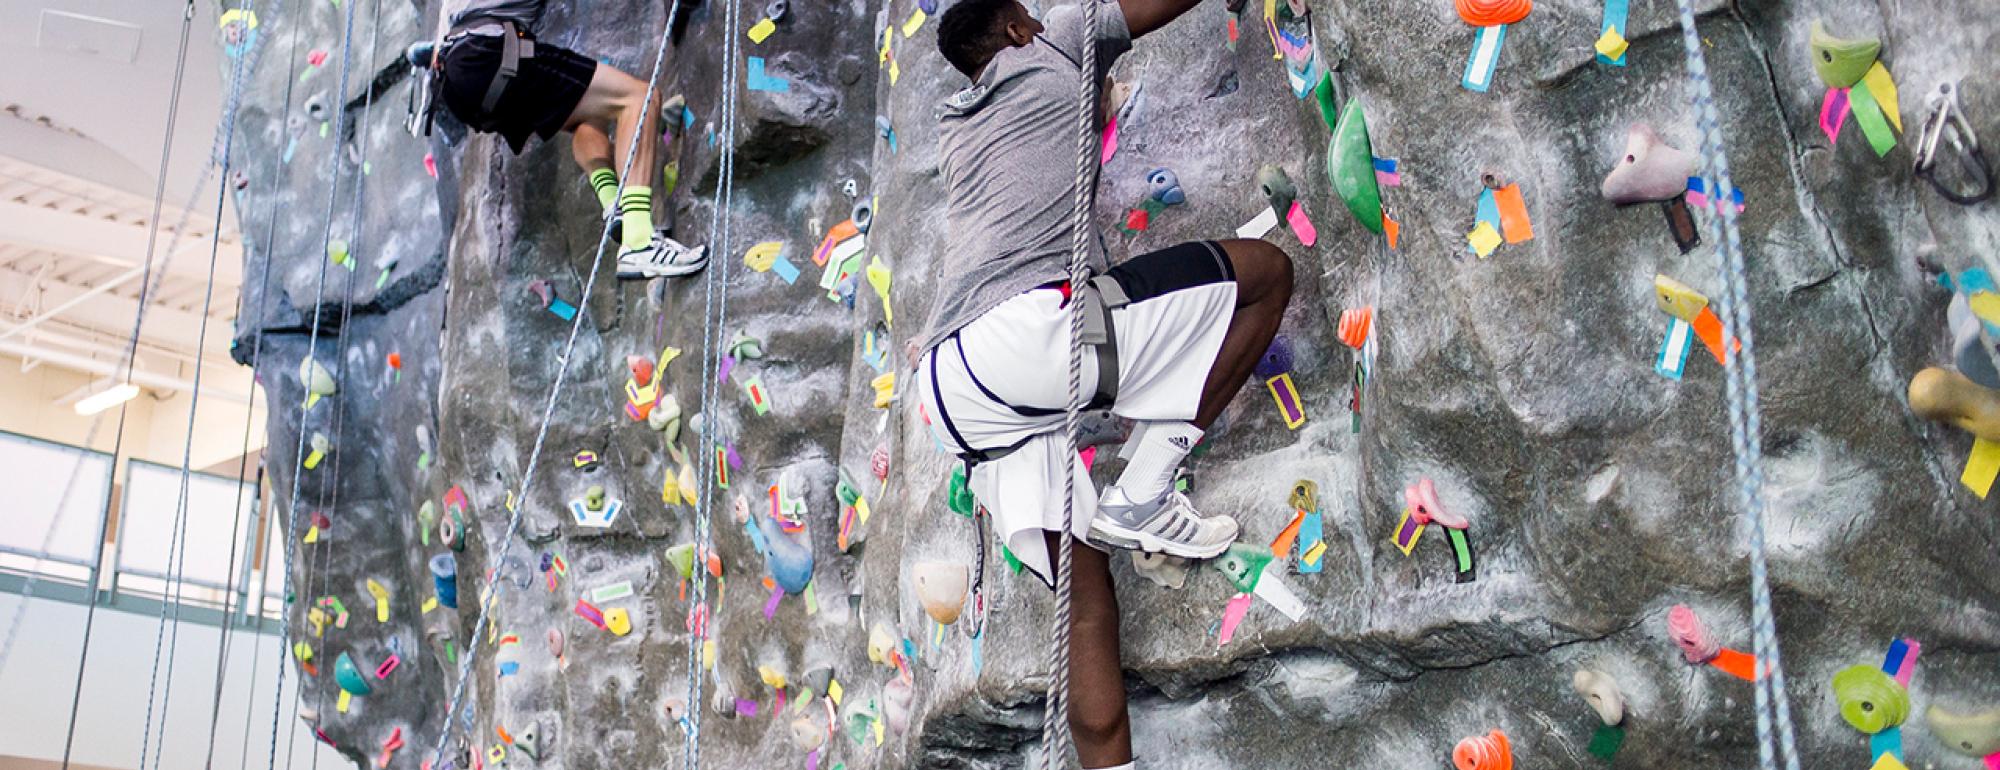 Two people climbing an indoor climbing wall at the ARC.